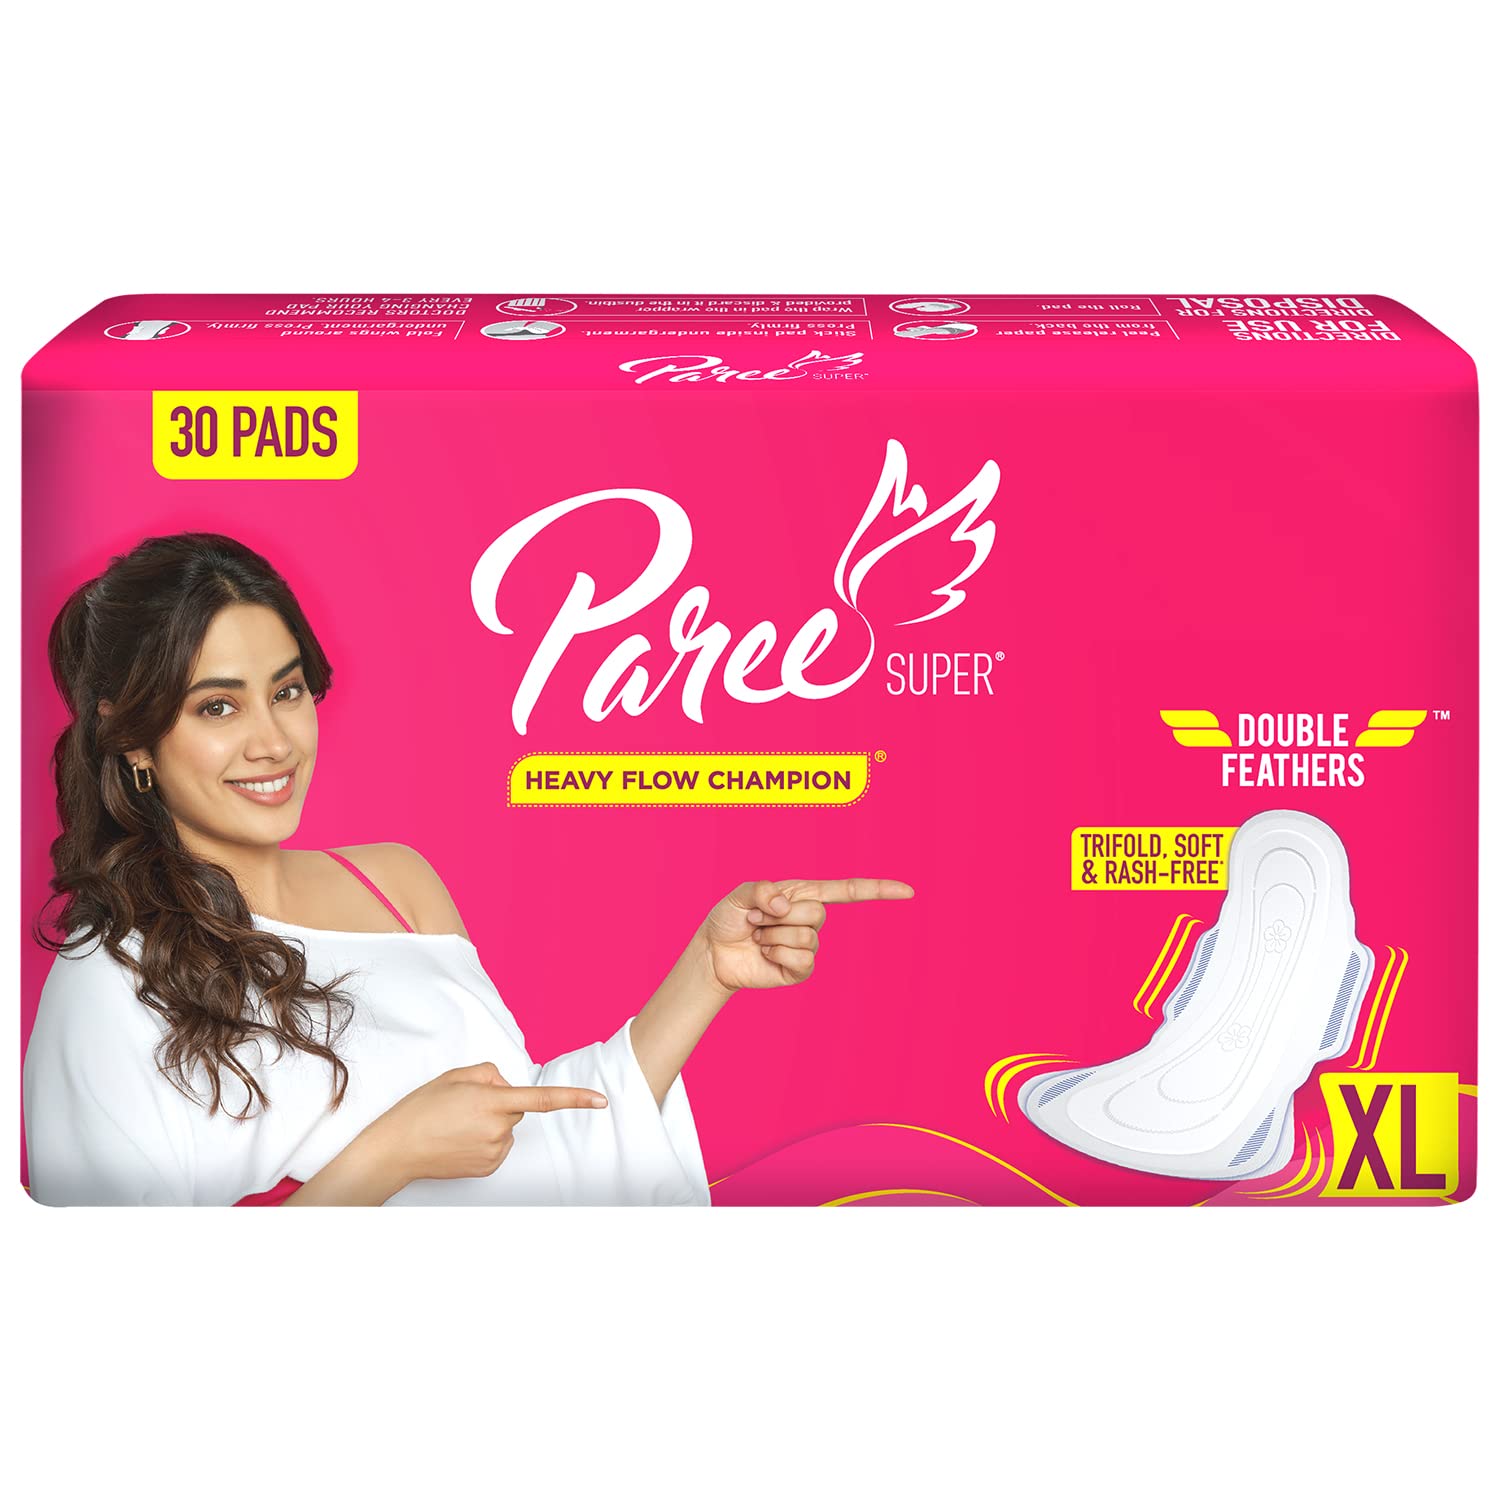 Paree Super Soft Sanitary Pads for Women With Double Feathers (Size - XL) - 30 Pads